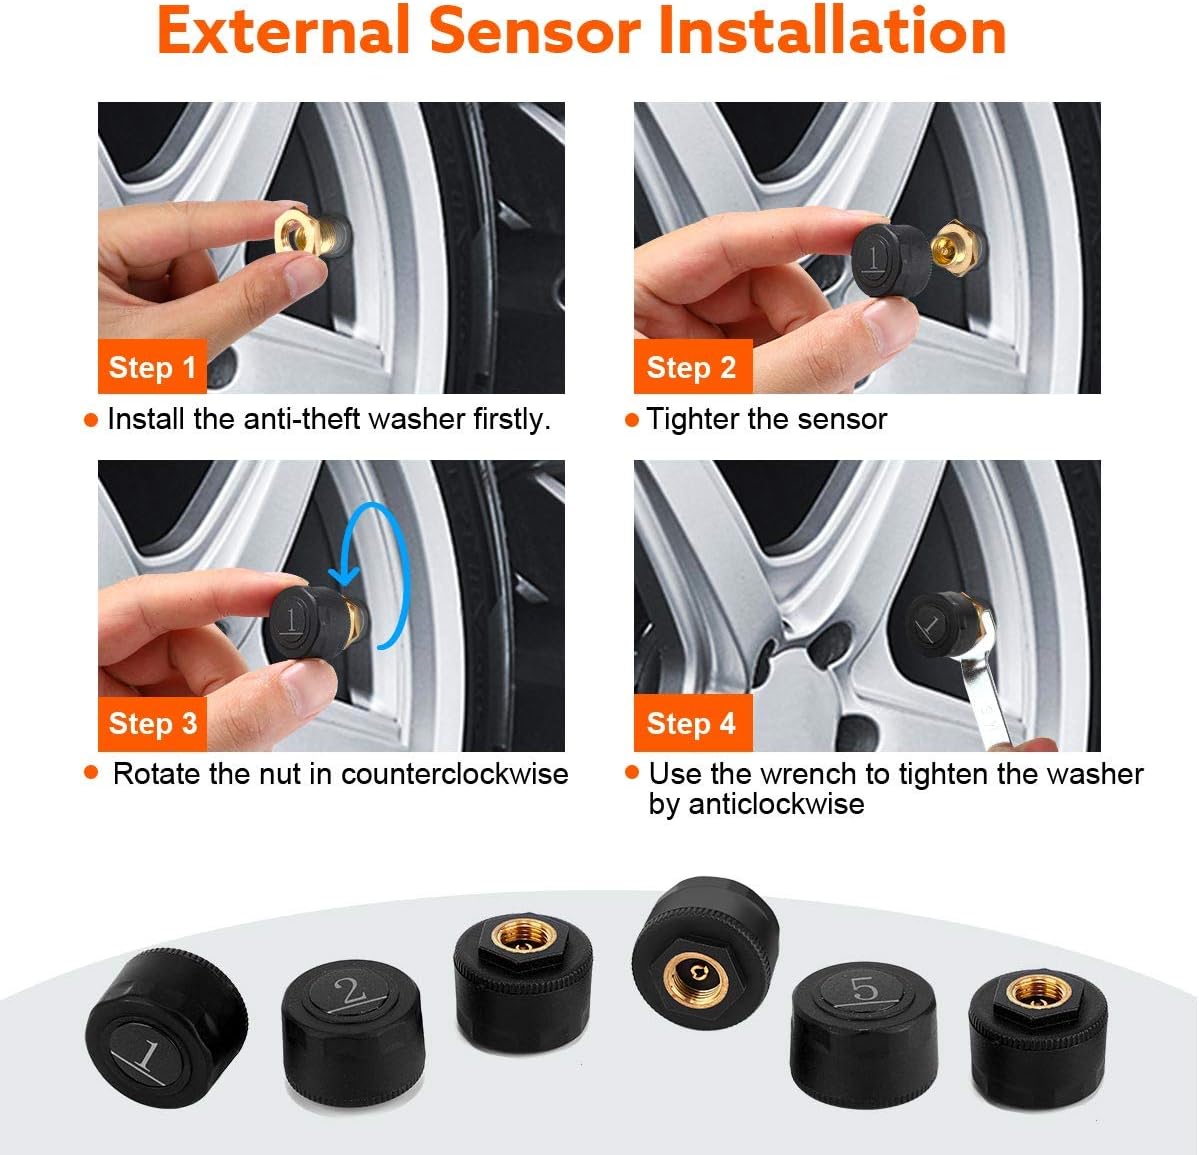 TPMS with 6 External Sensors for Trucks, Cars